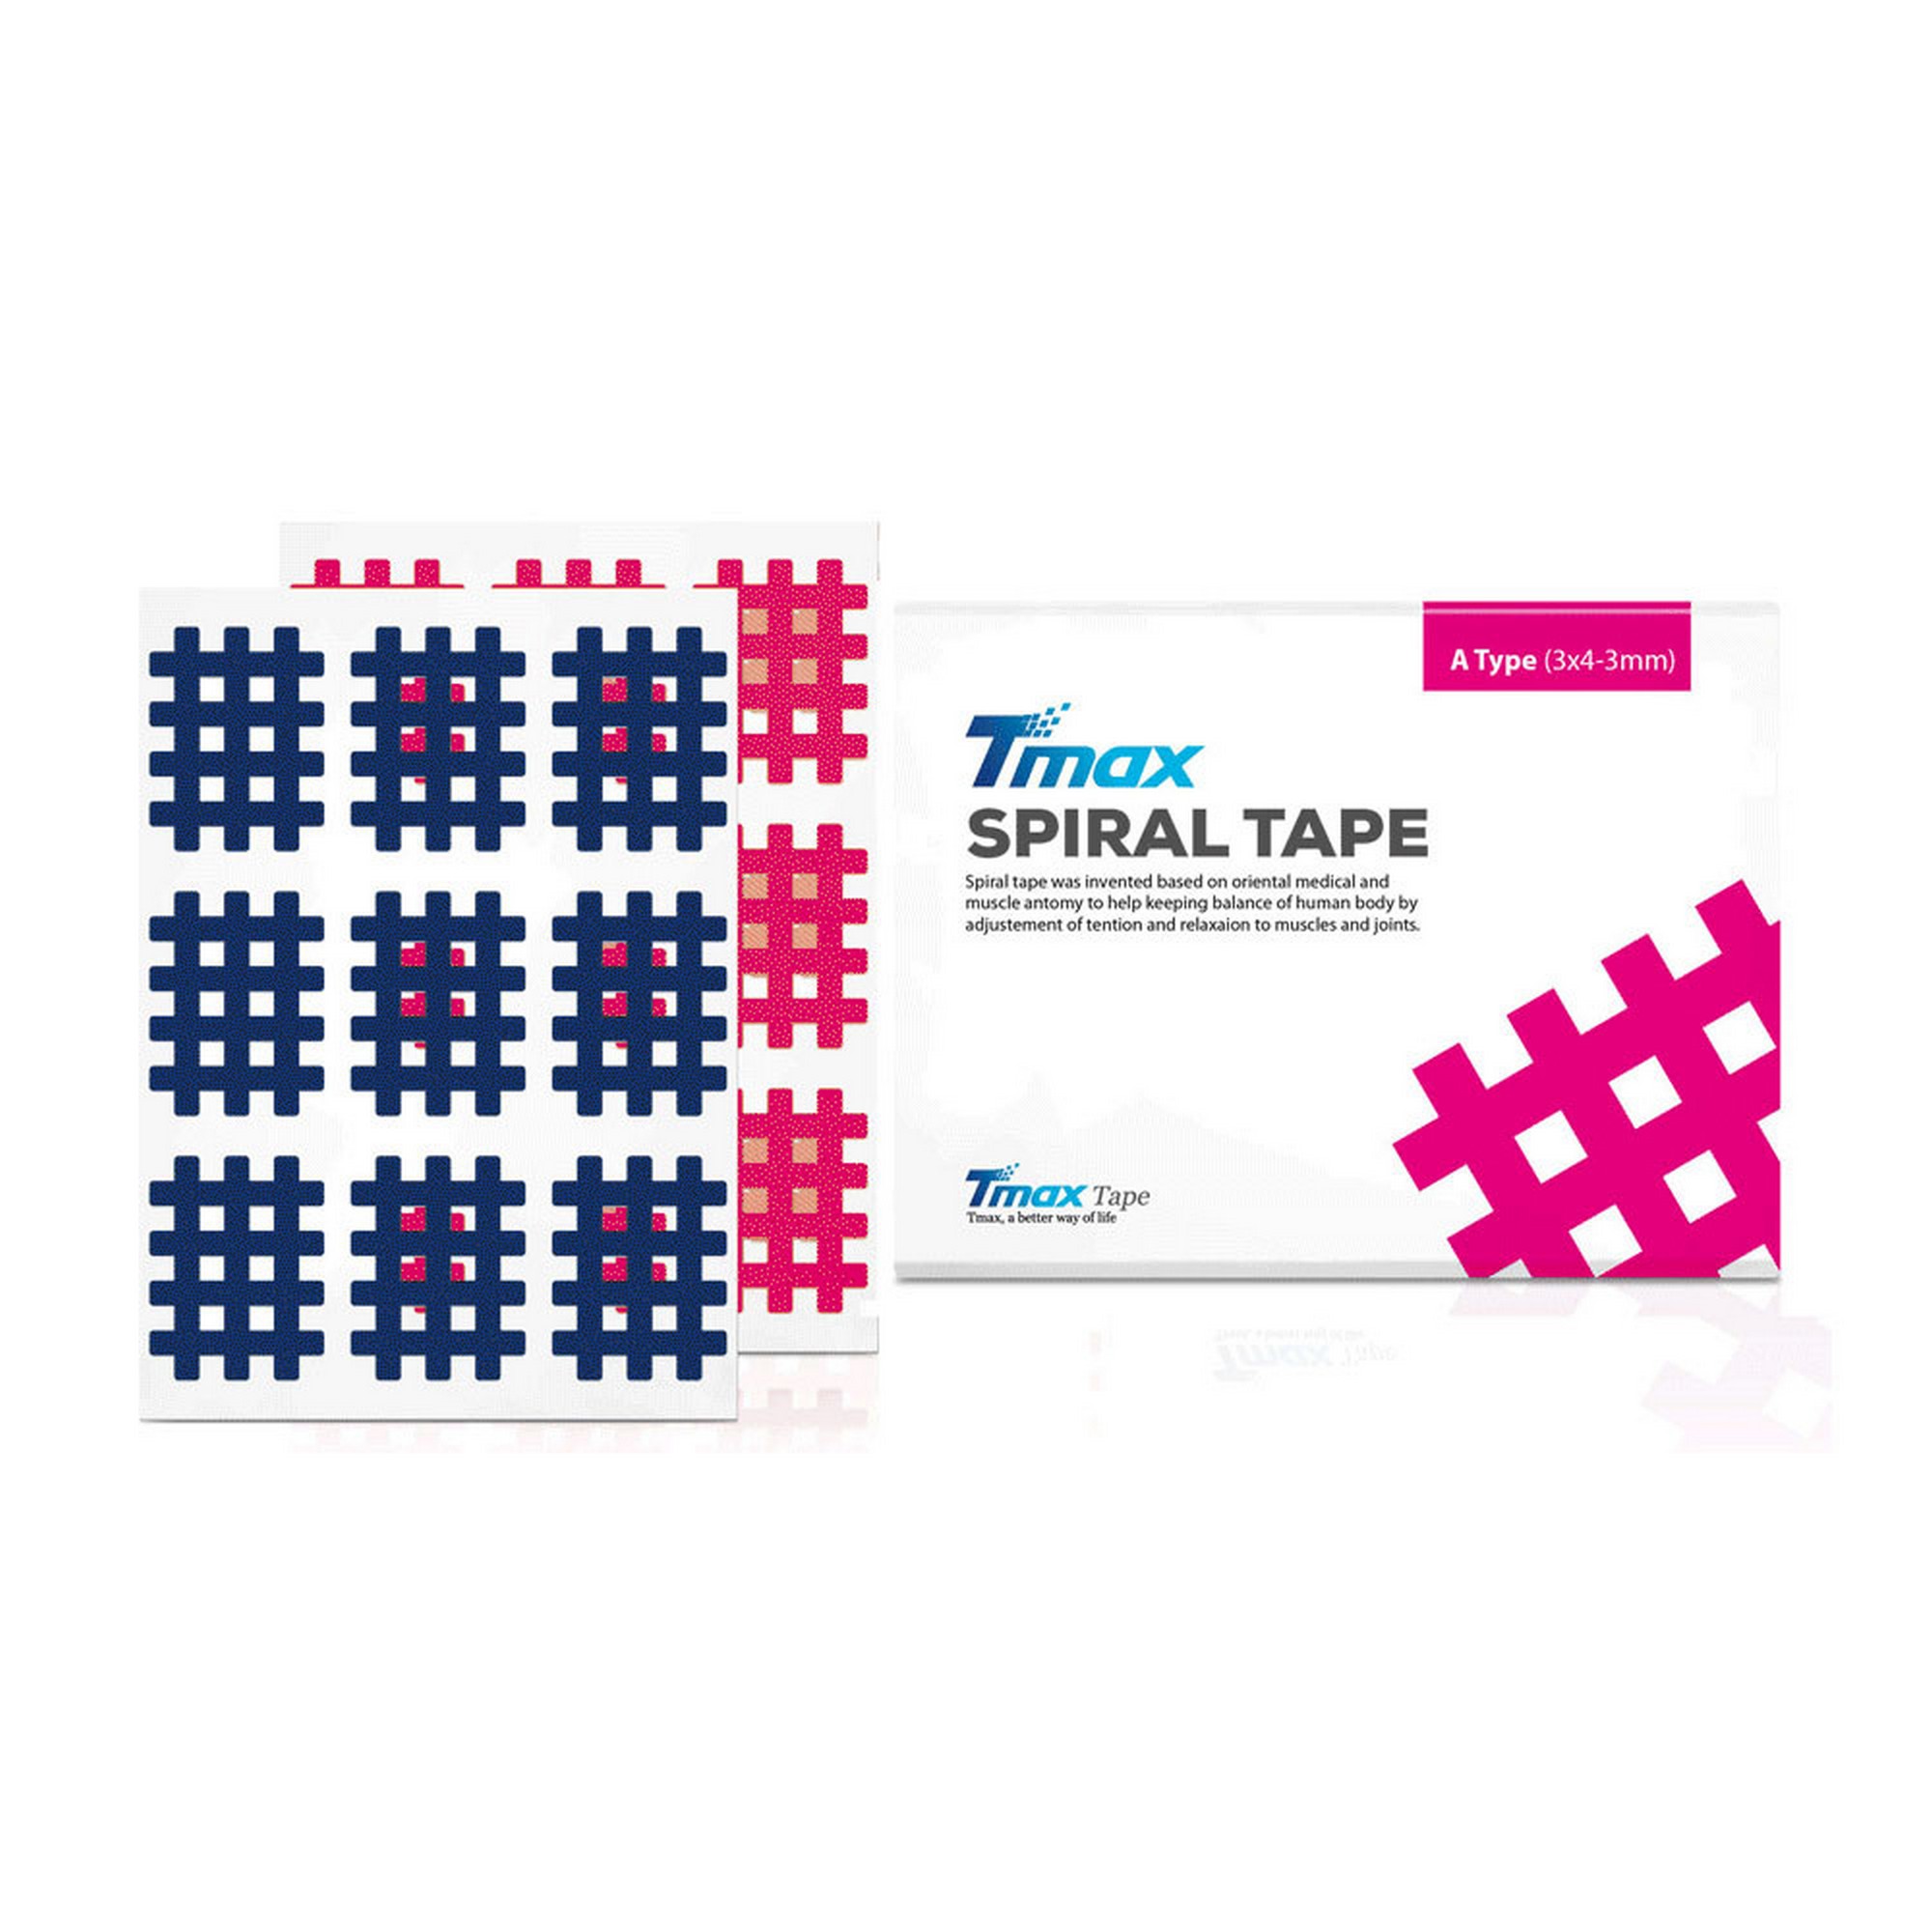 - Tmax Spiral Tape Type A (20 ) 423718 